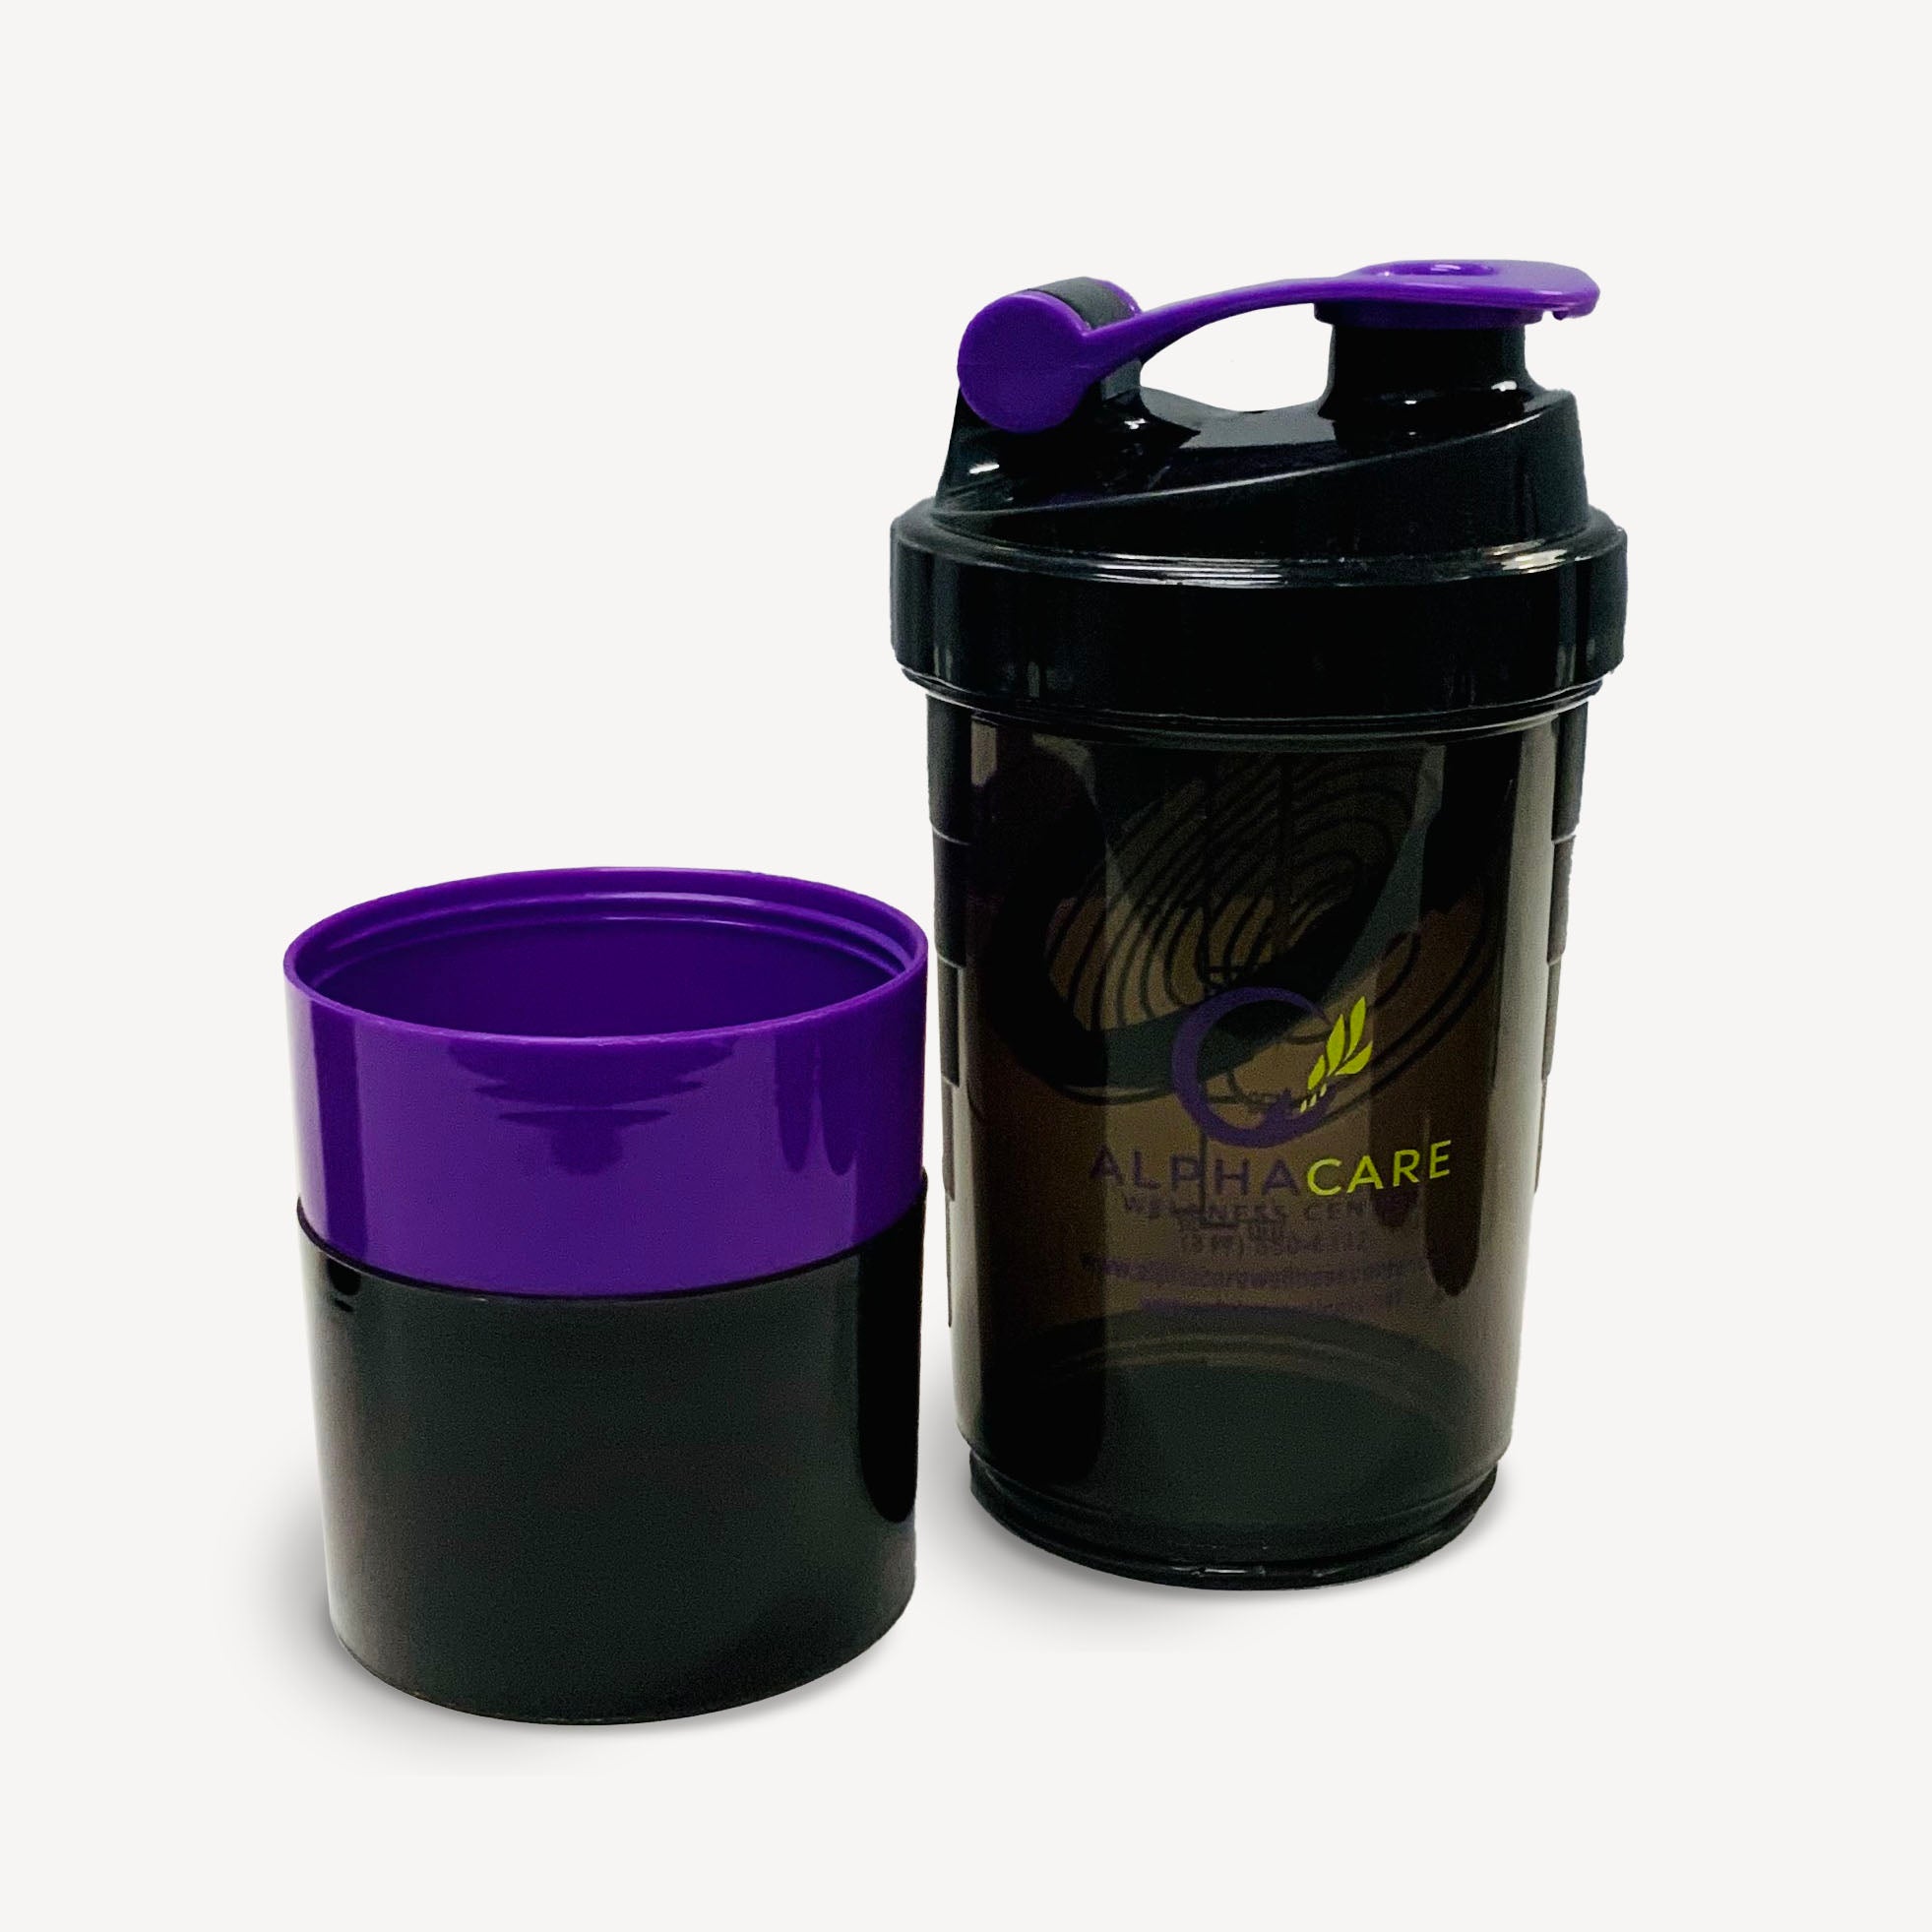 Alpha Care Wellness Tumbler Shaker Bottle – Alphaceuticals by Dr